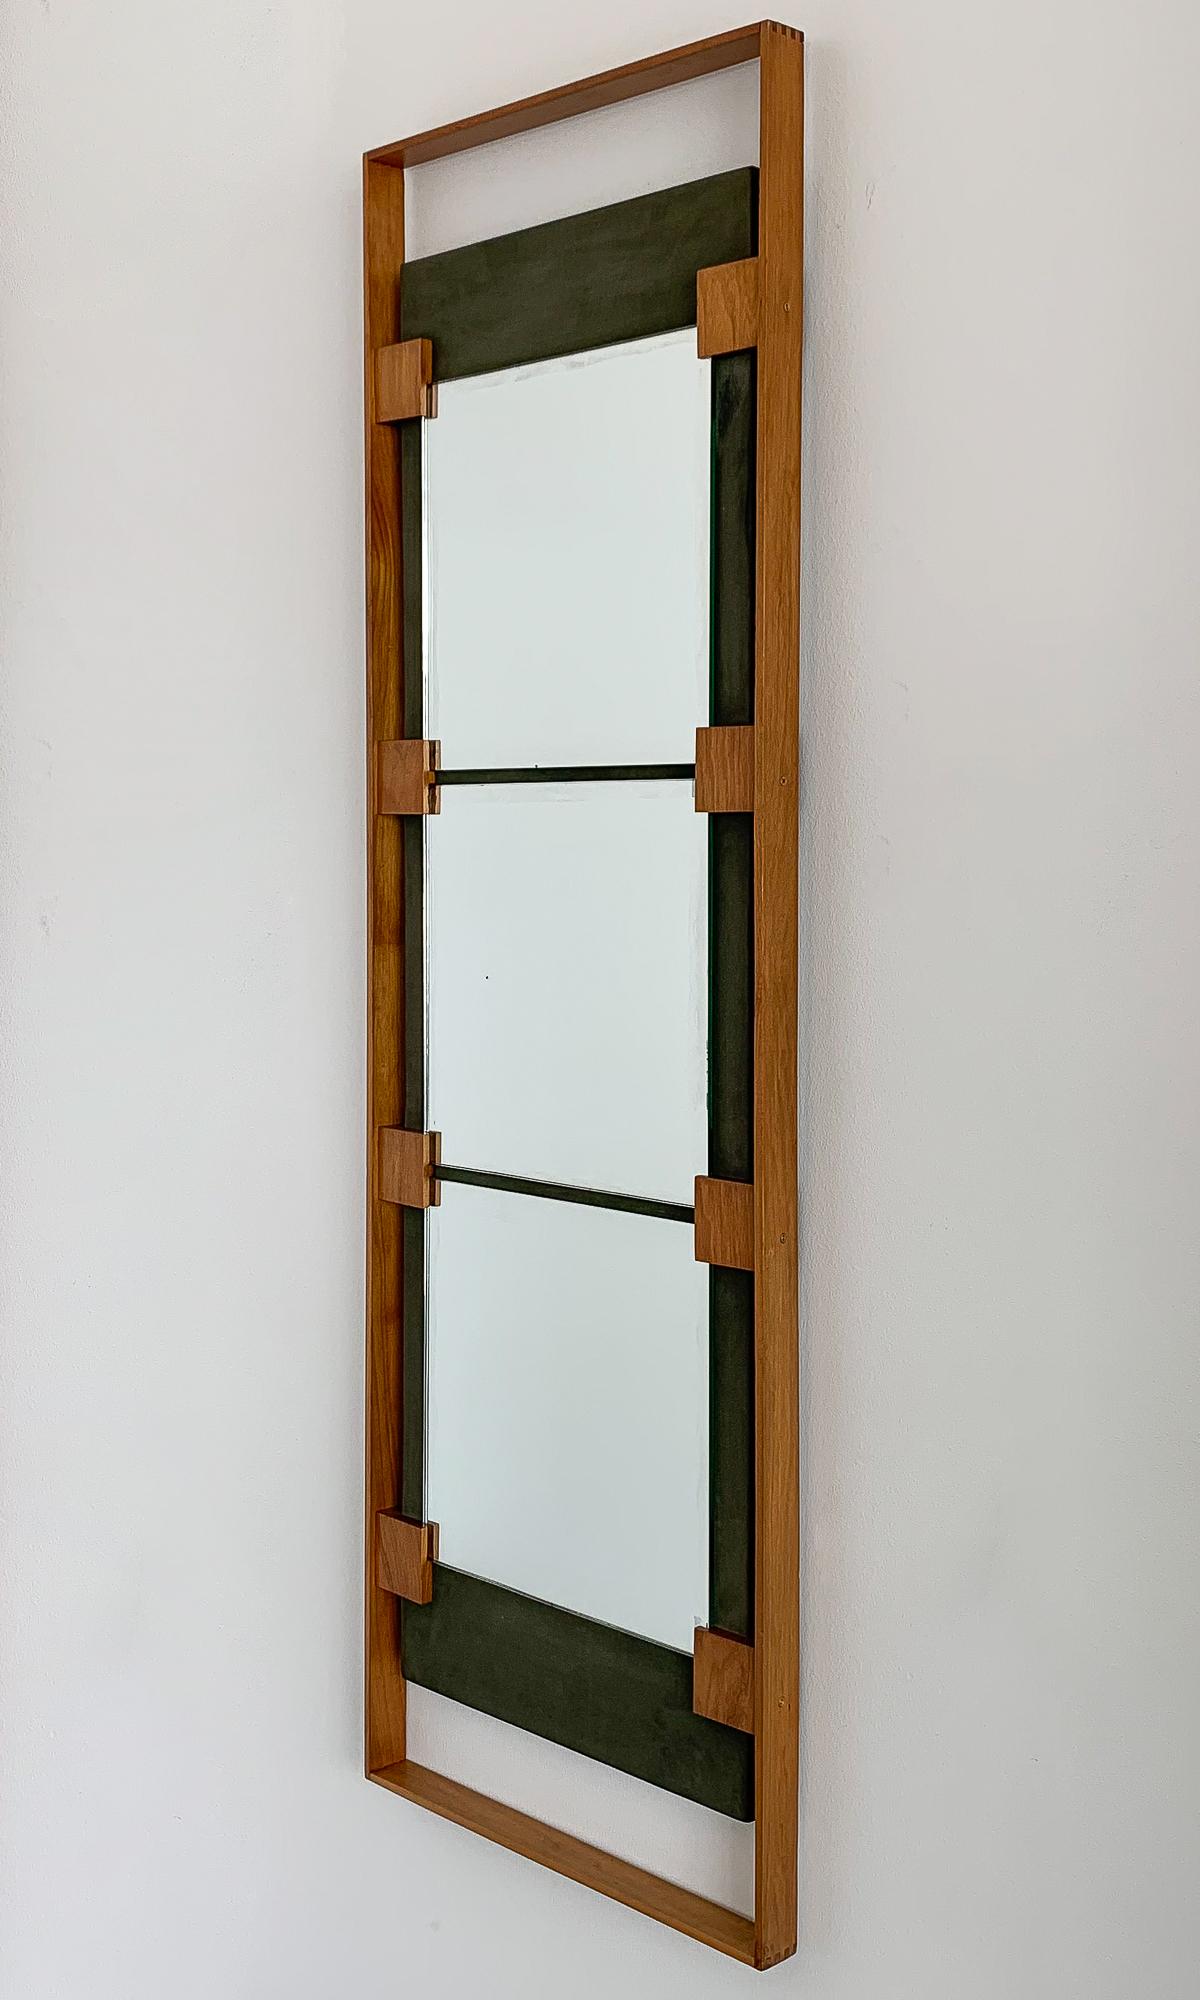 Ico Parisi wall mirror for Stildomus, circa 1960s. Light colored teak wood construction with floating interior wrapped in green suede. Three 11.75